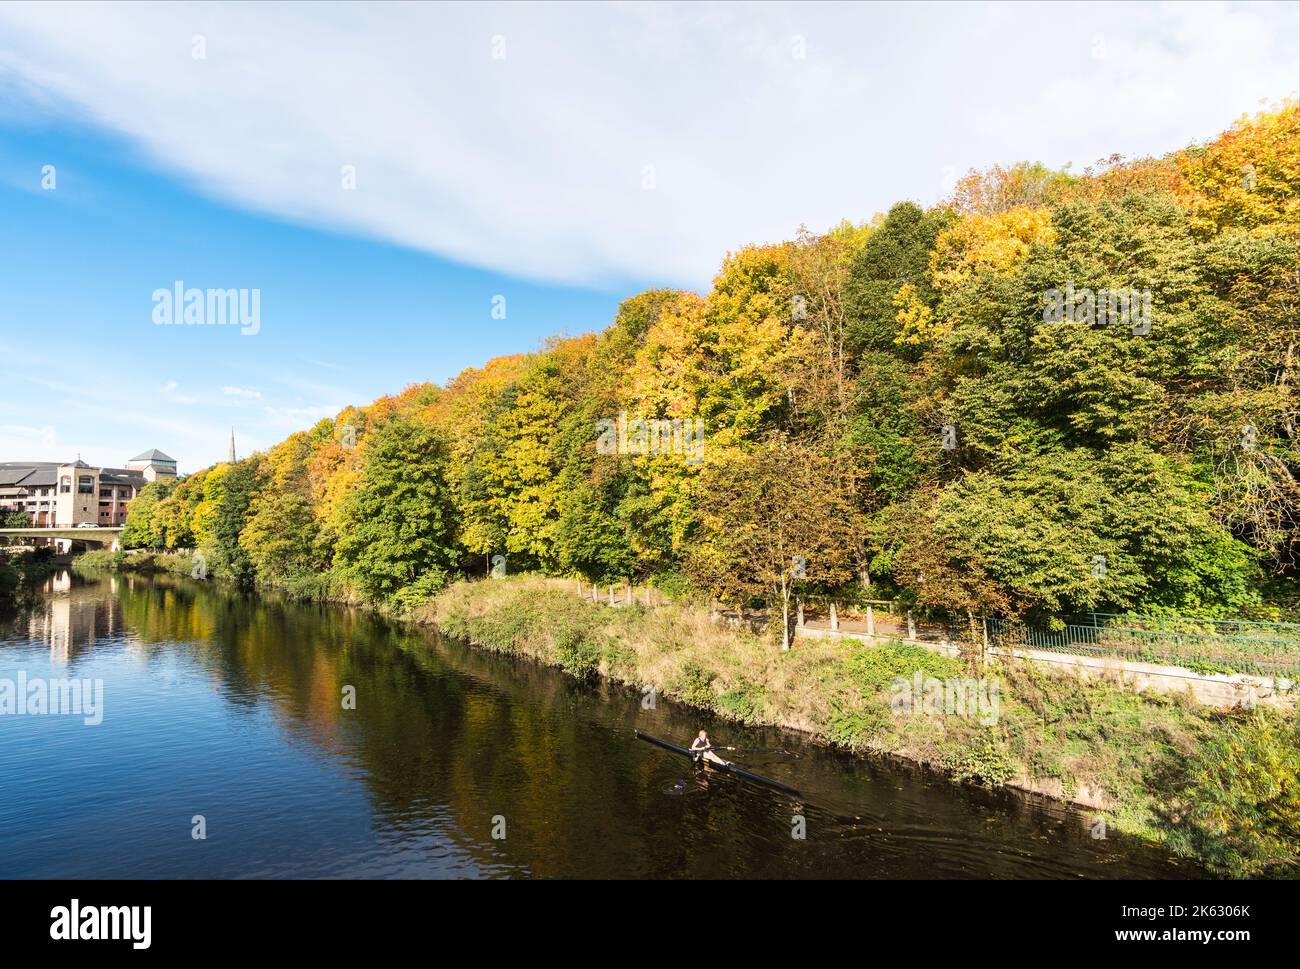 A woman rows a racing boat or shell past a row of Autumn trees along the river Wear in Durham City, England, UK Stock Photo